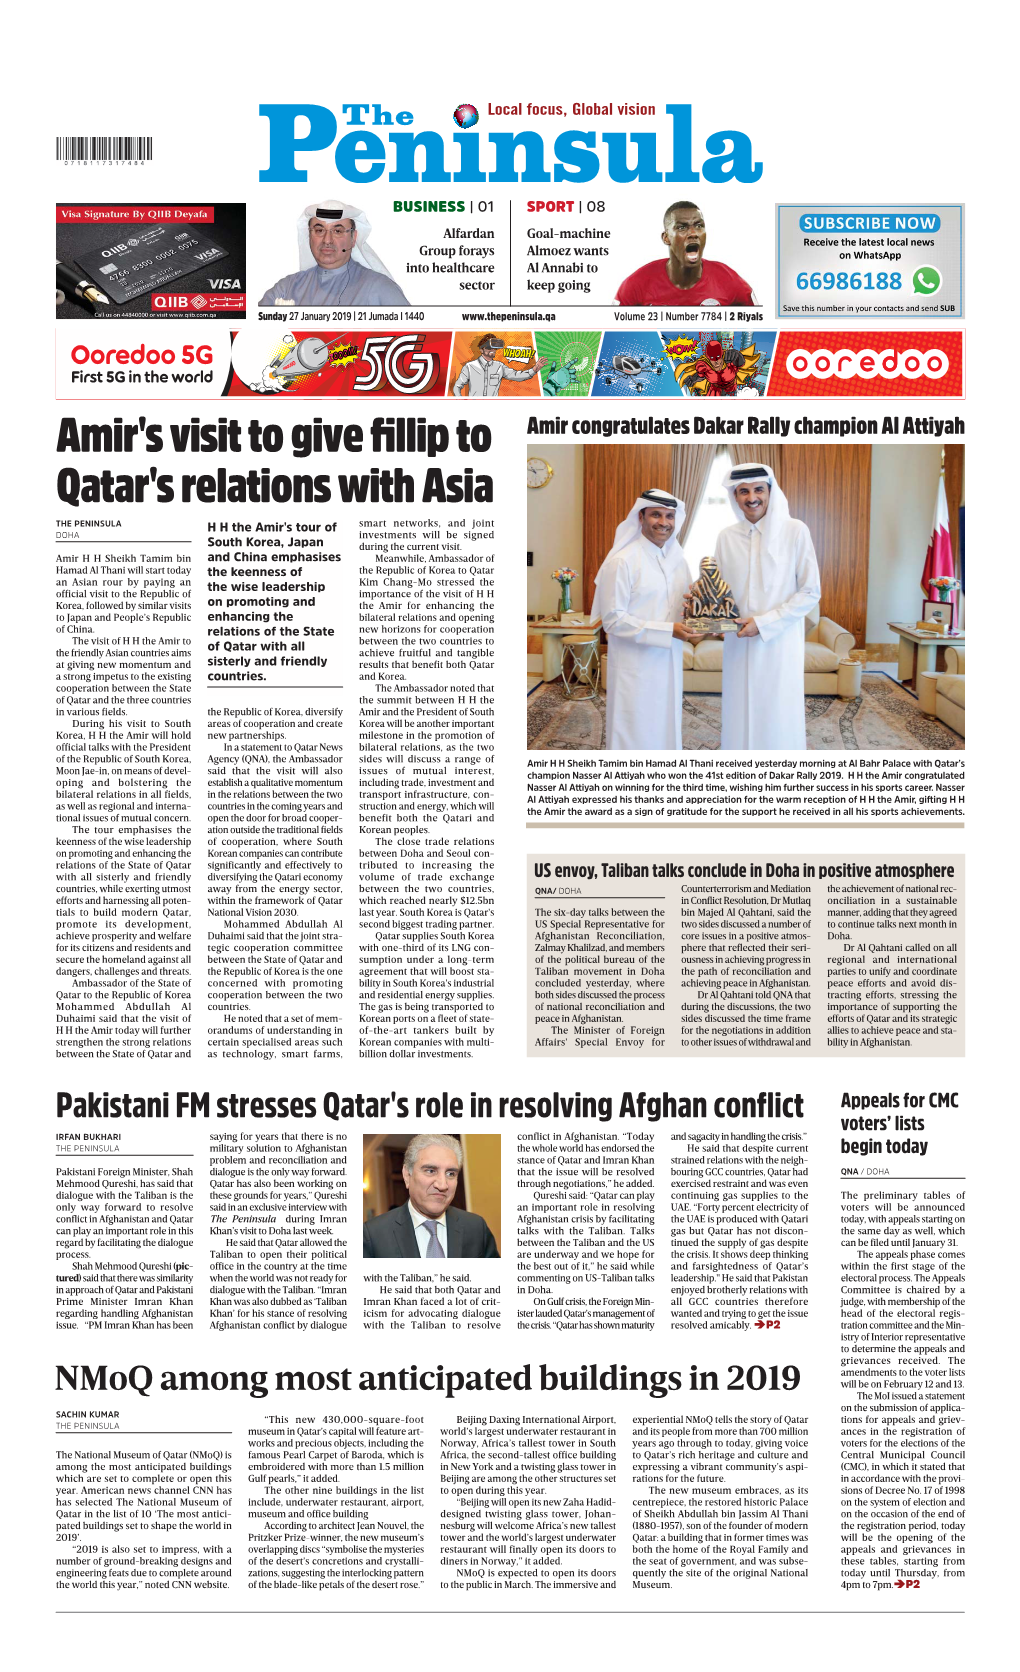 Amir's Visit to Give Fillip to Qatar's Relations with Asia